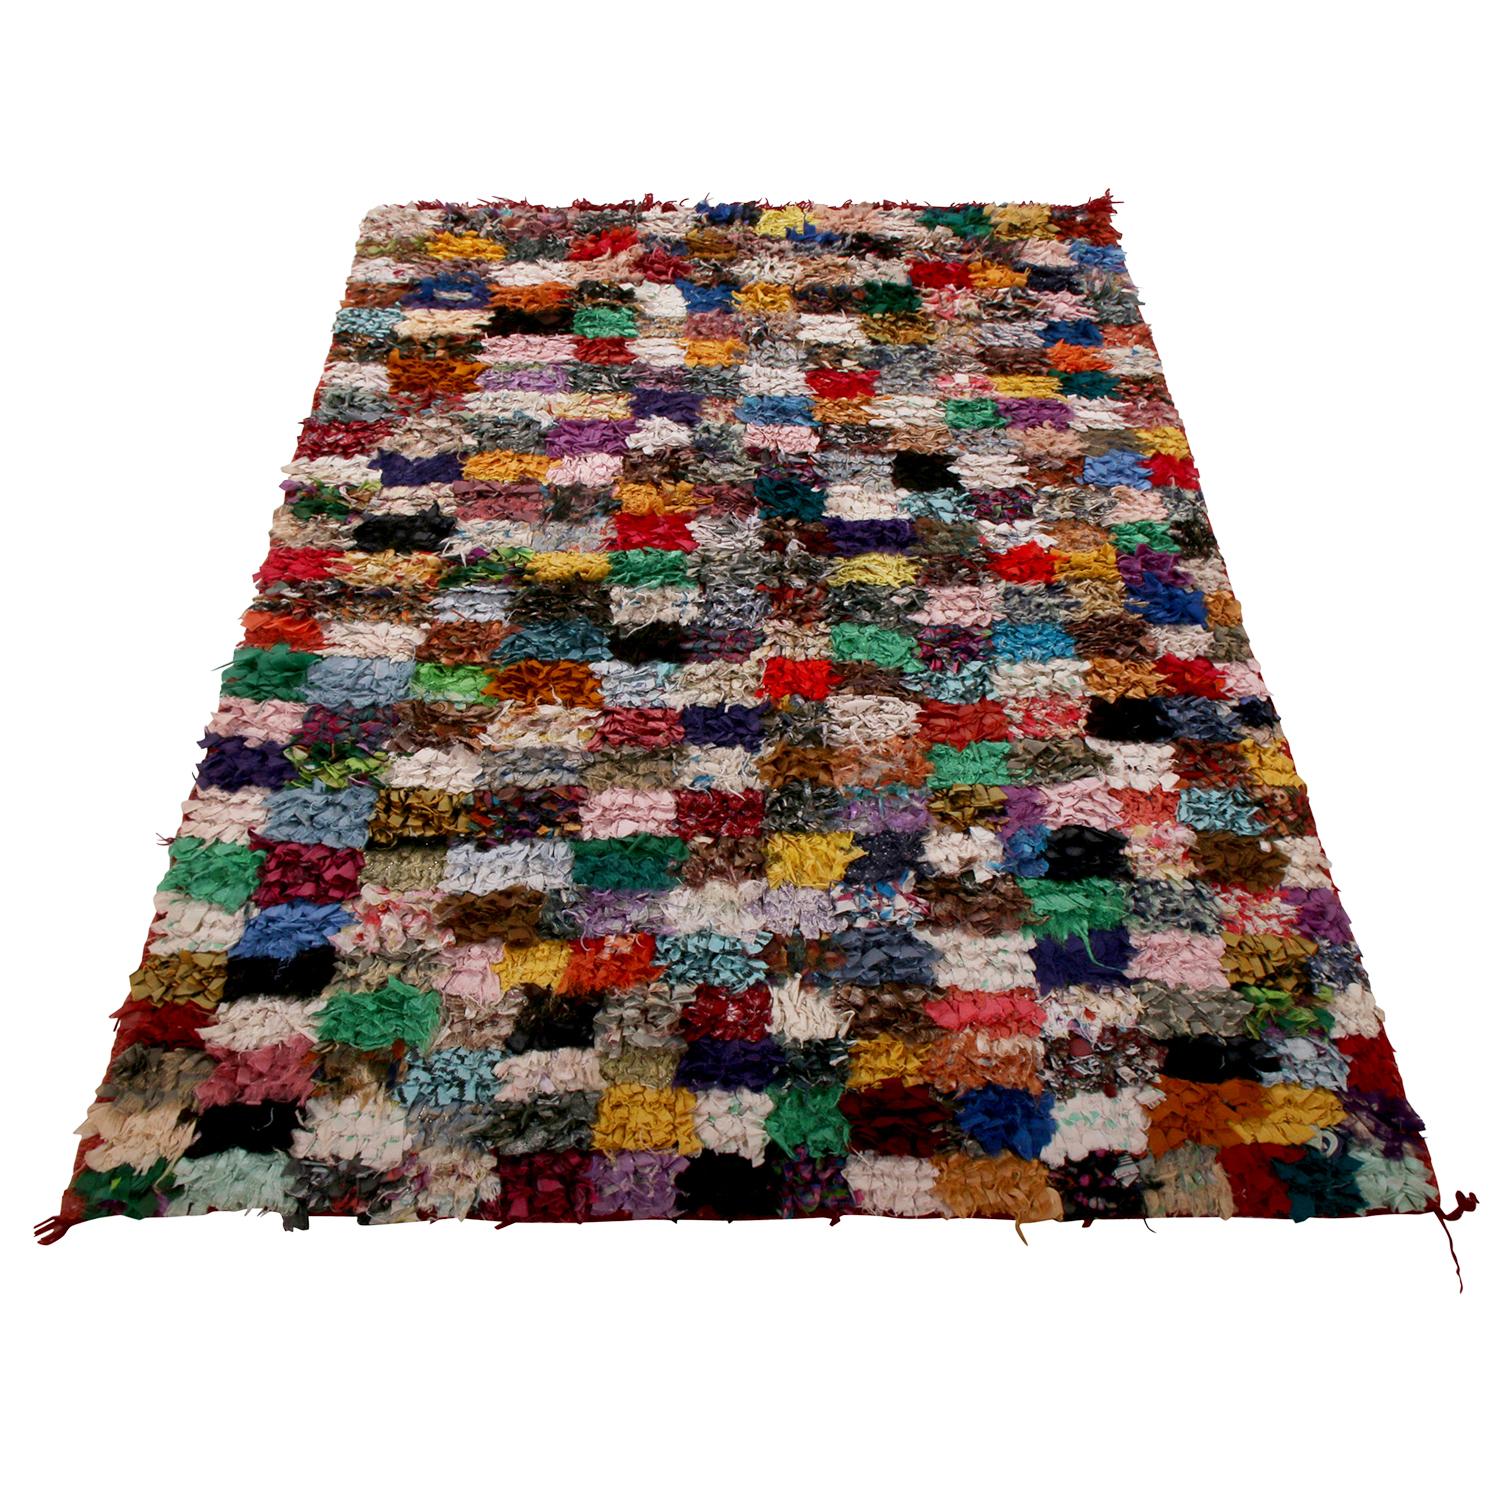 Hand knotted in textural, durable fabric originating between 1950-1960, this vintage Moroccan Berber rug enjoys the idyllic play of geometry and color celebrated among the ancestral tribal weavers responsible for its beauty in this lineage. The very